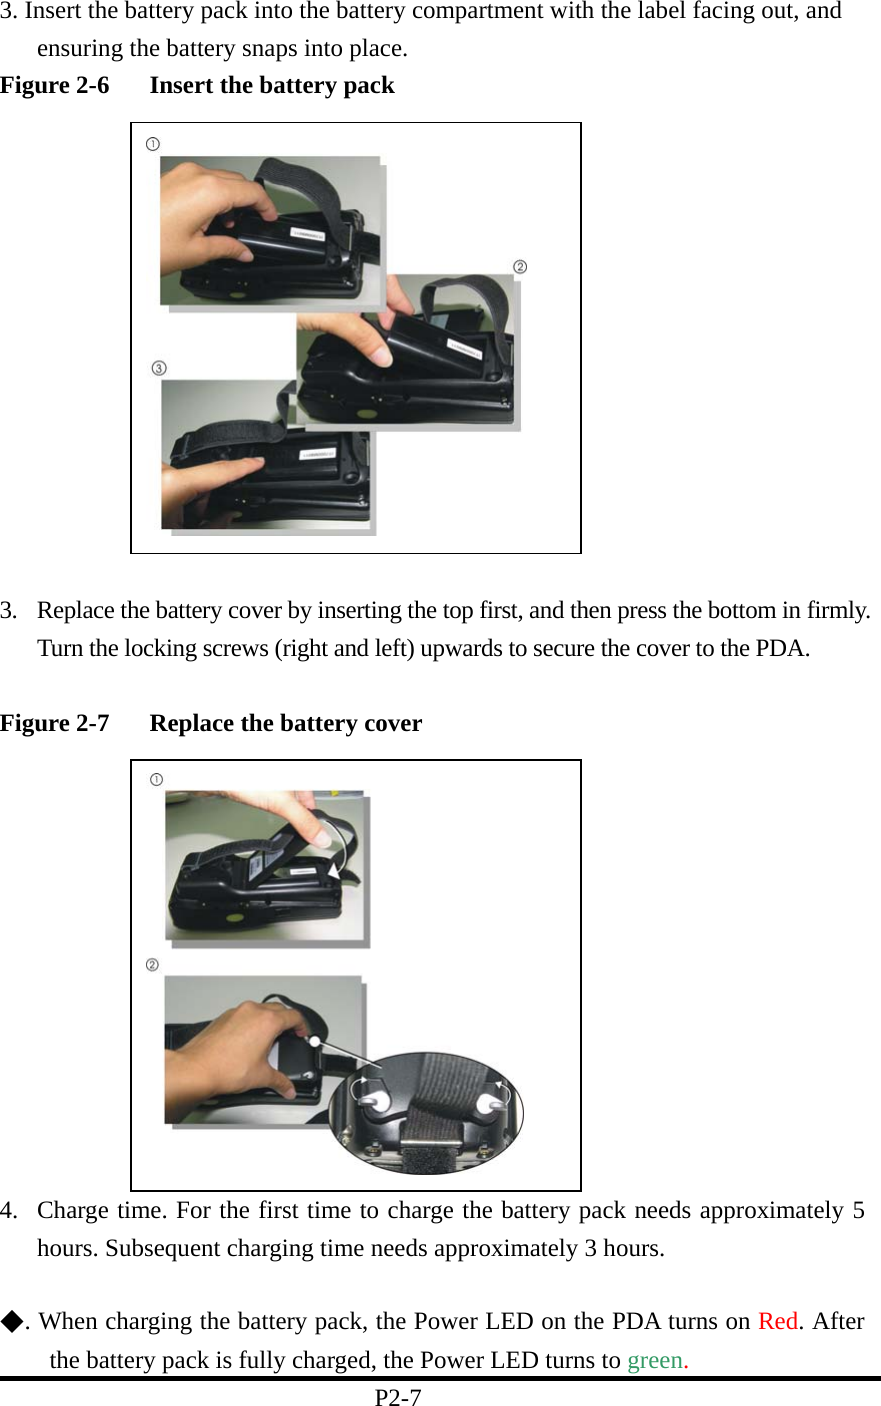 3. Insert the battery pack into the battery compartment with the label facing out, and ensuring the battery snaps into place.   Figure 2-6  Insert the battery pack              3.  Replace the battery cover by inserting the top first, and then press the bottom in firmly. Turn the locking screws (right and left) upwards to secure the cover to the PDA.    Figure 2-7  Replace the battery cover             4.  Charge time. For the first time to charge the battery pack needs approximately 5 hours. Subsequent charging time needs approximately 3 hours.    ◆. When charging the battery pack, the Power LED on the PDA turns on Red. After the battery pack is fully charged, the Power LED turns to green.                               P2-7   